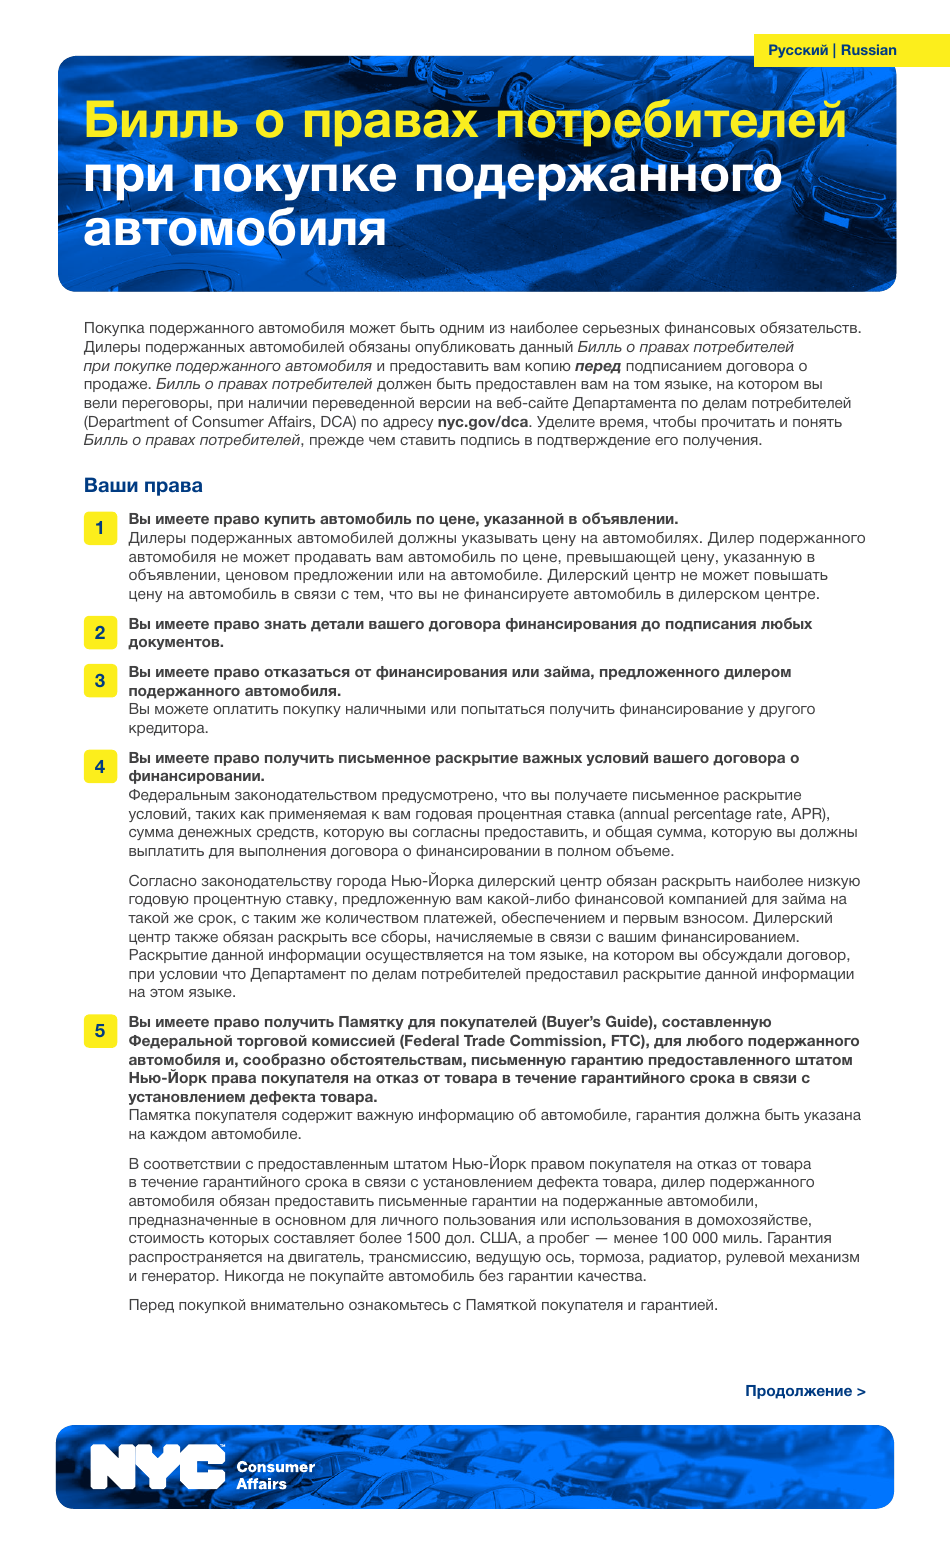 Used Car Consumer Bill of Rights - New York City (Russian), Page 1